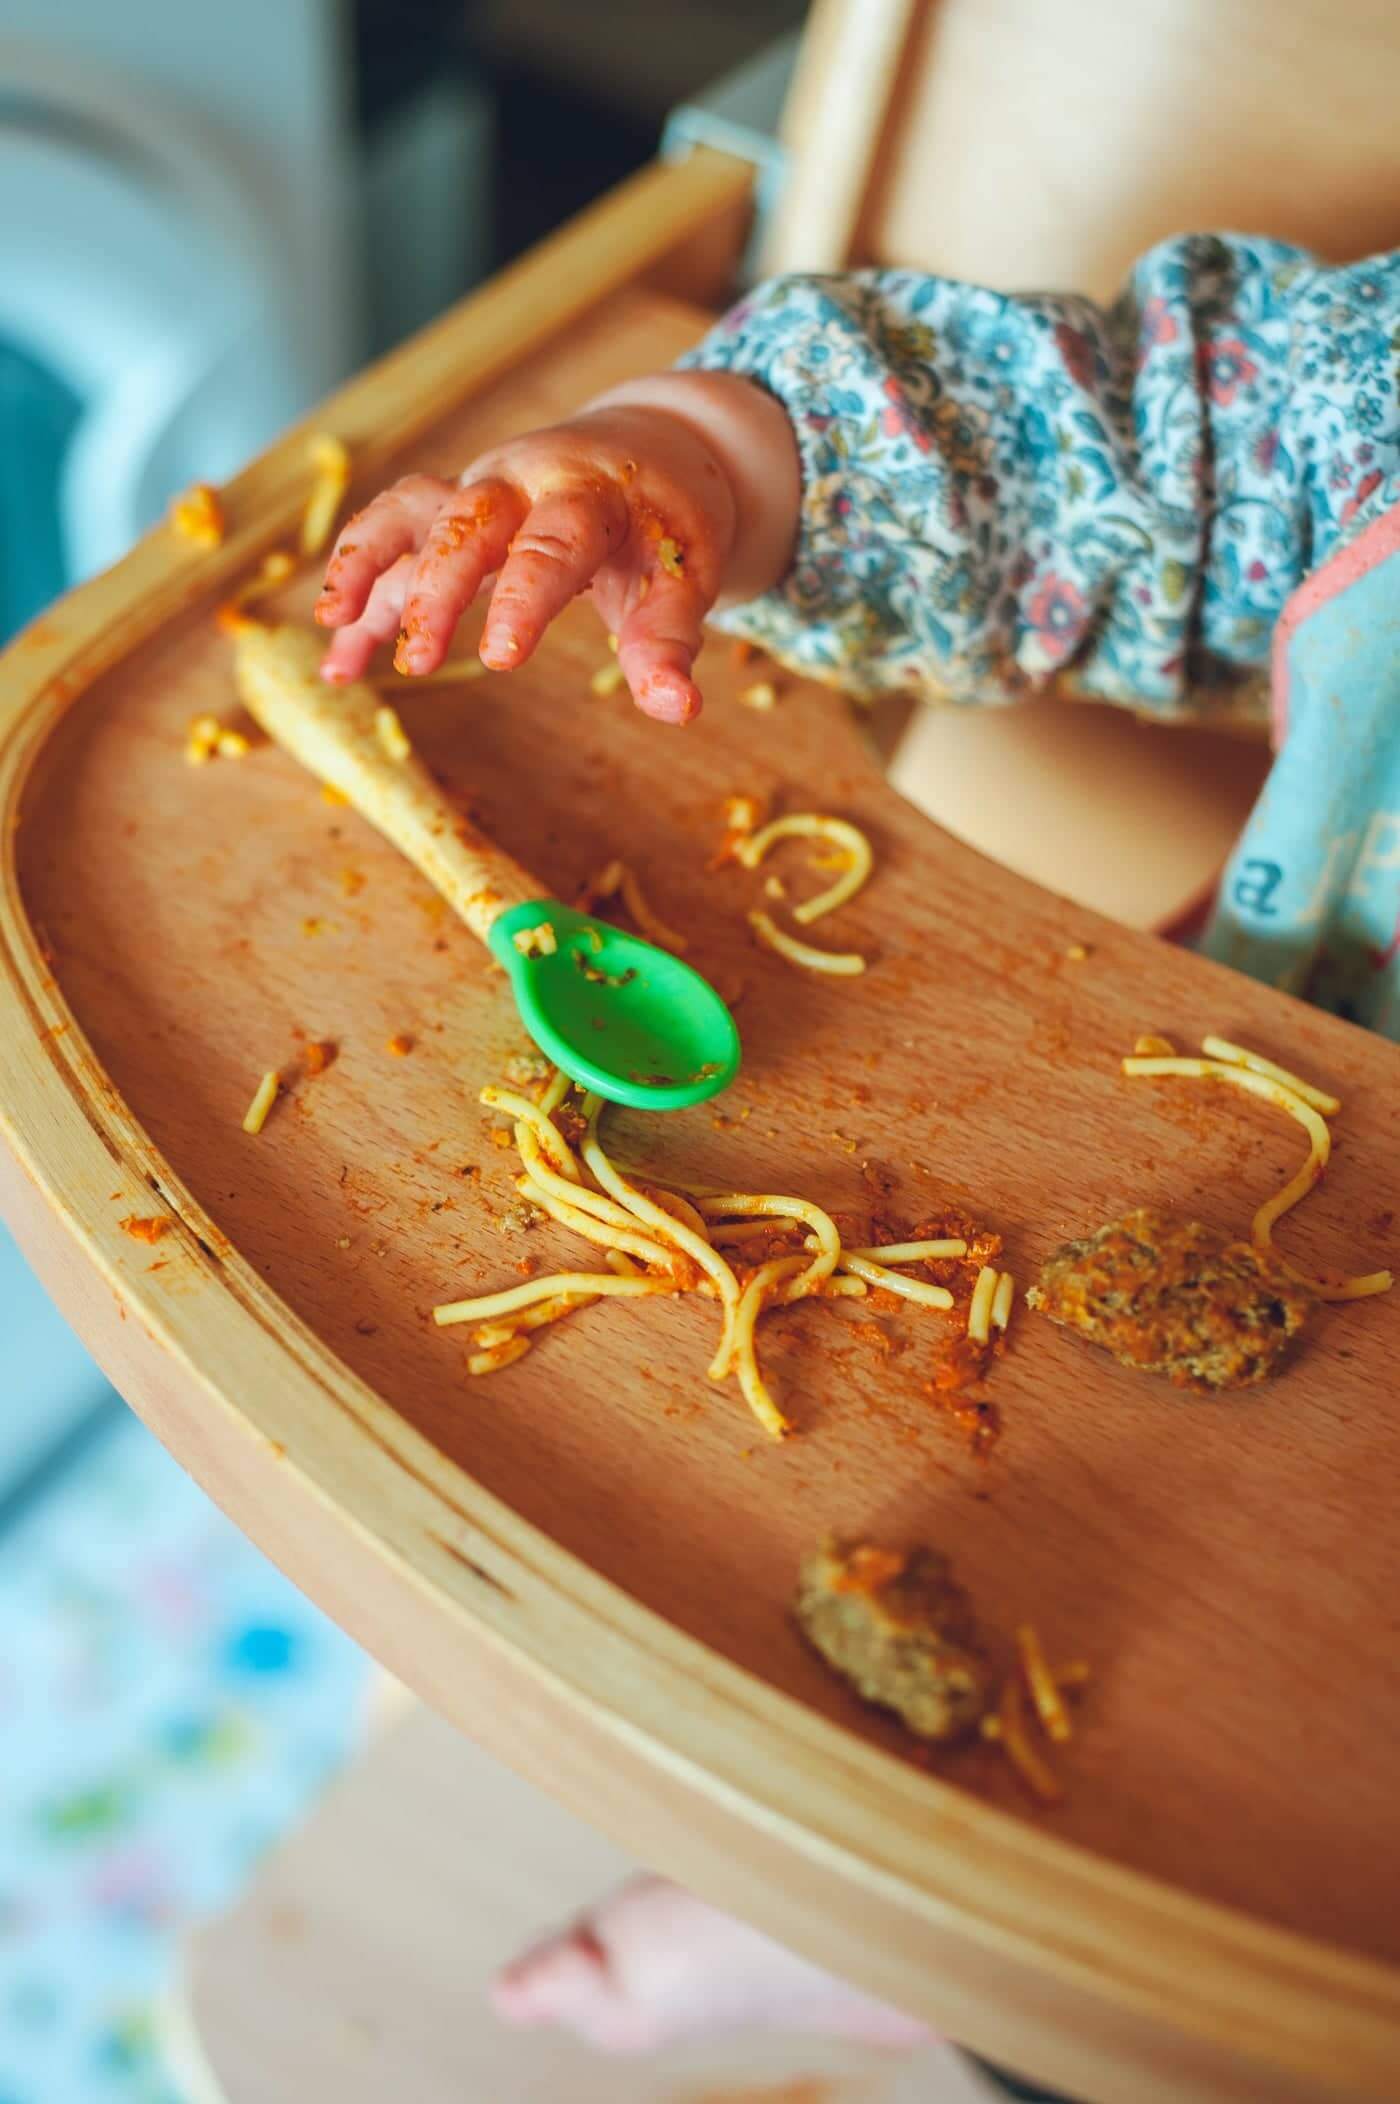 Baby playing with spaghetti and meatballs in a solid wood high chair